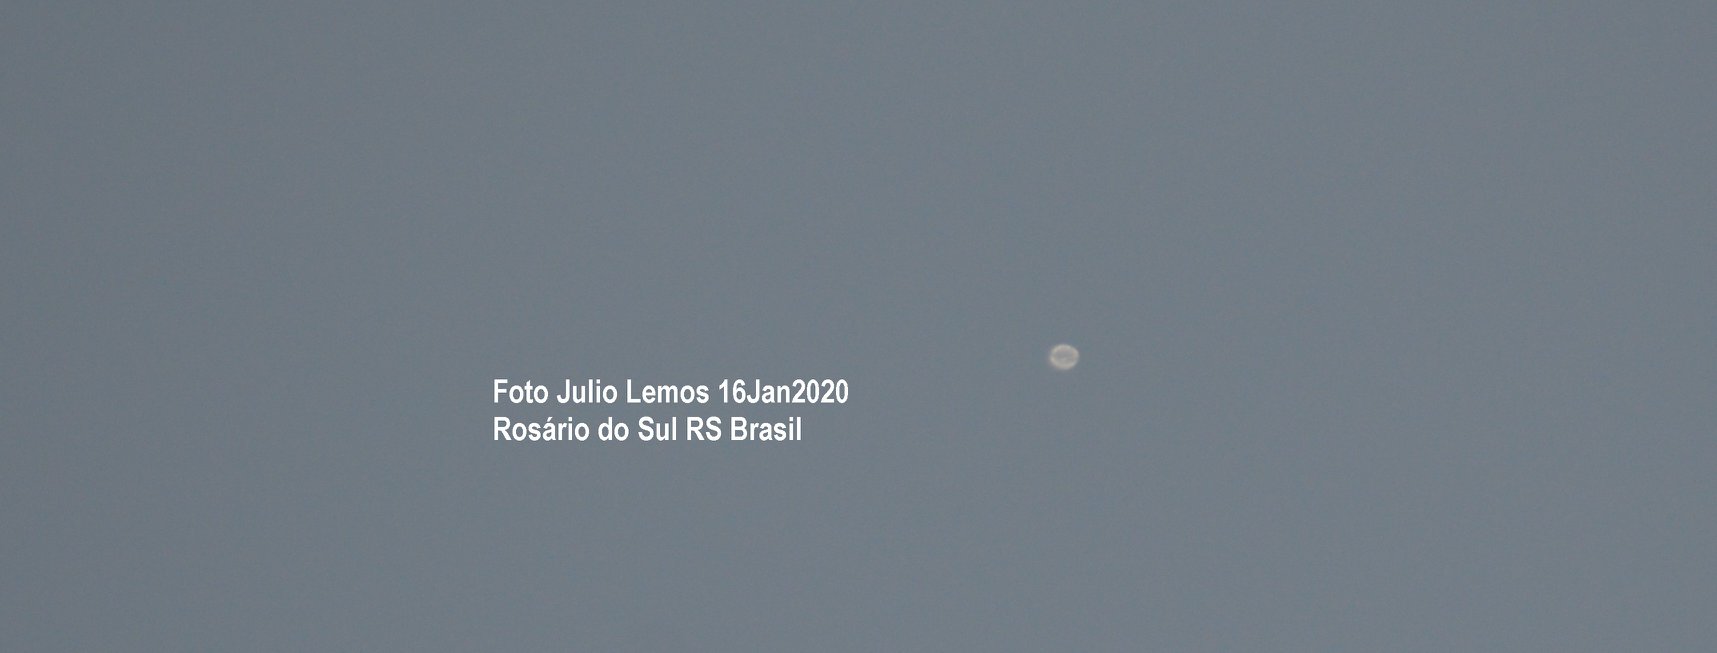 View of HBAL802 above Rosario do Sul, Brazil on January 16, 2020